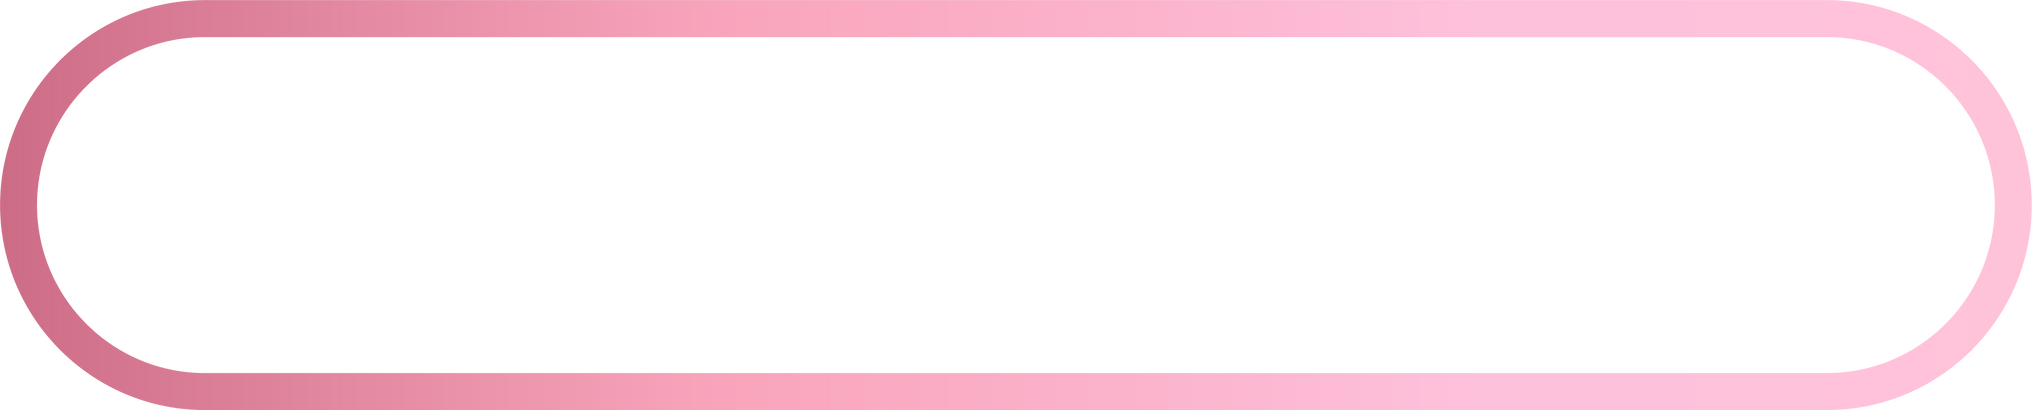 Gradient Pink Rounded Rectangle